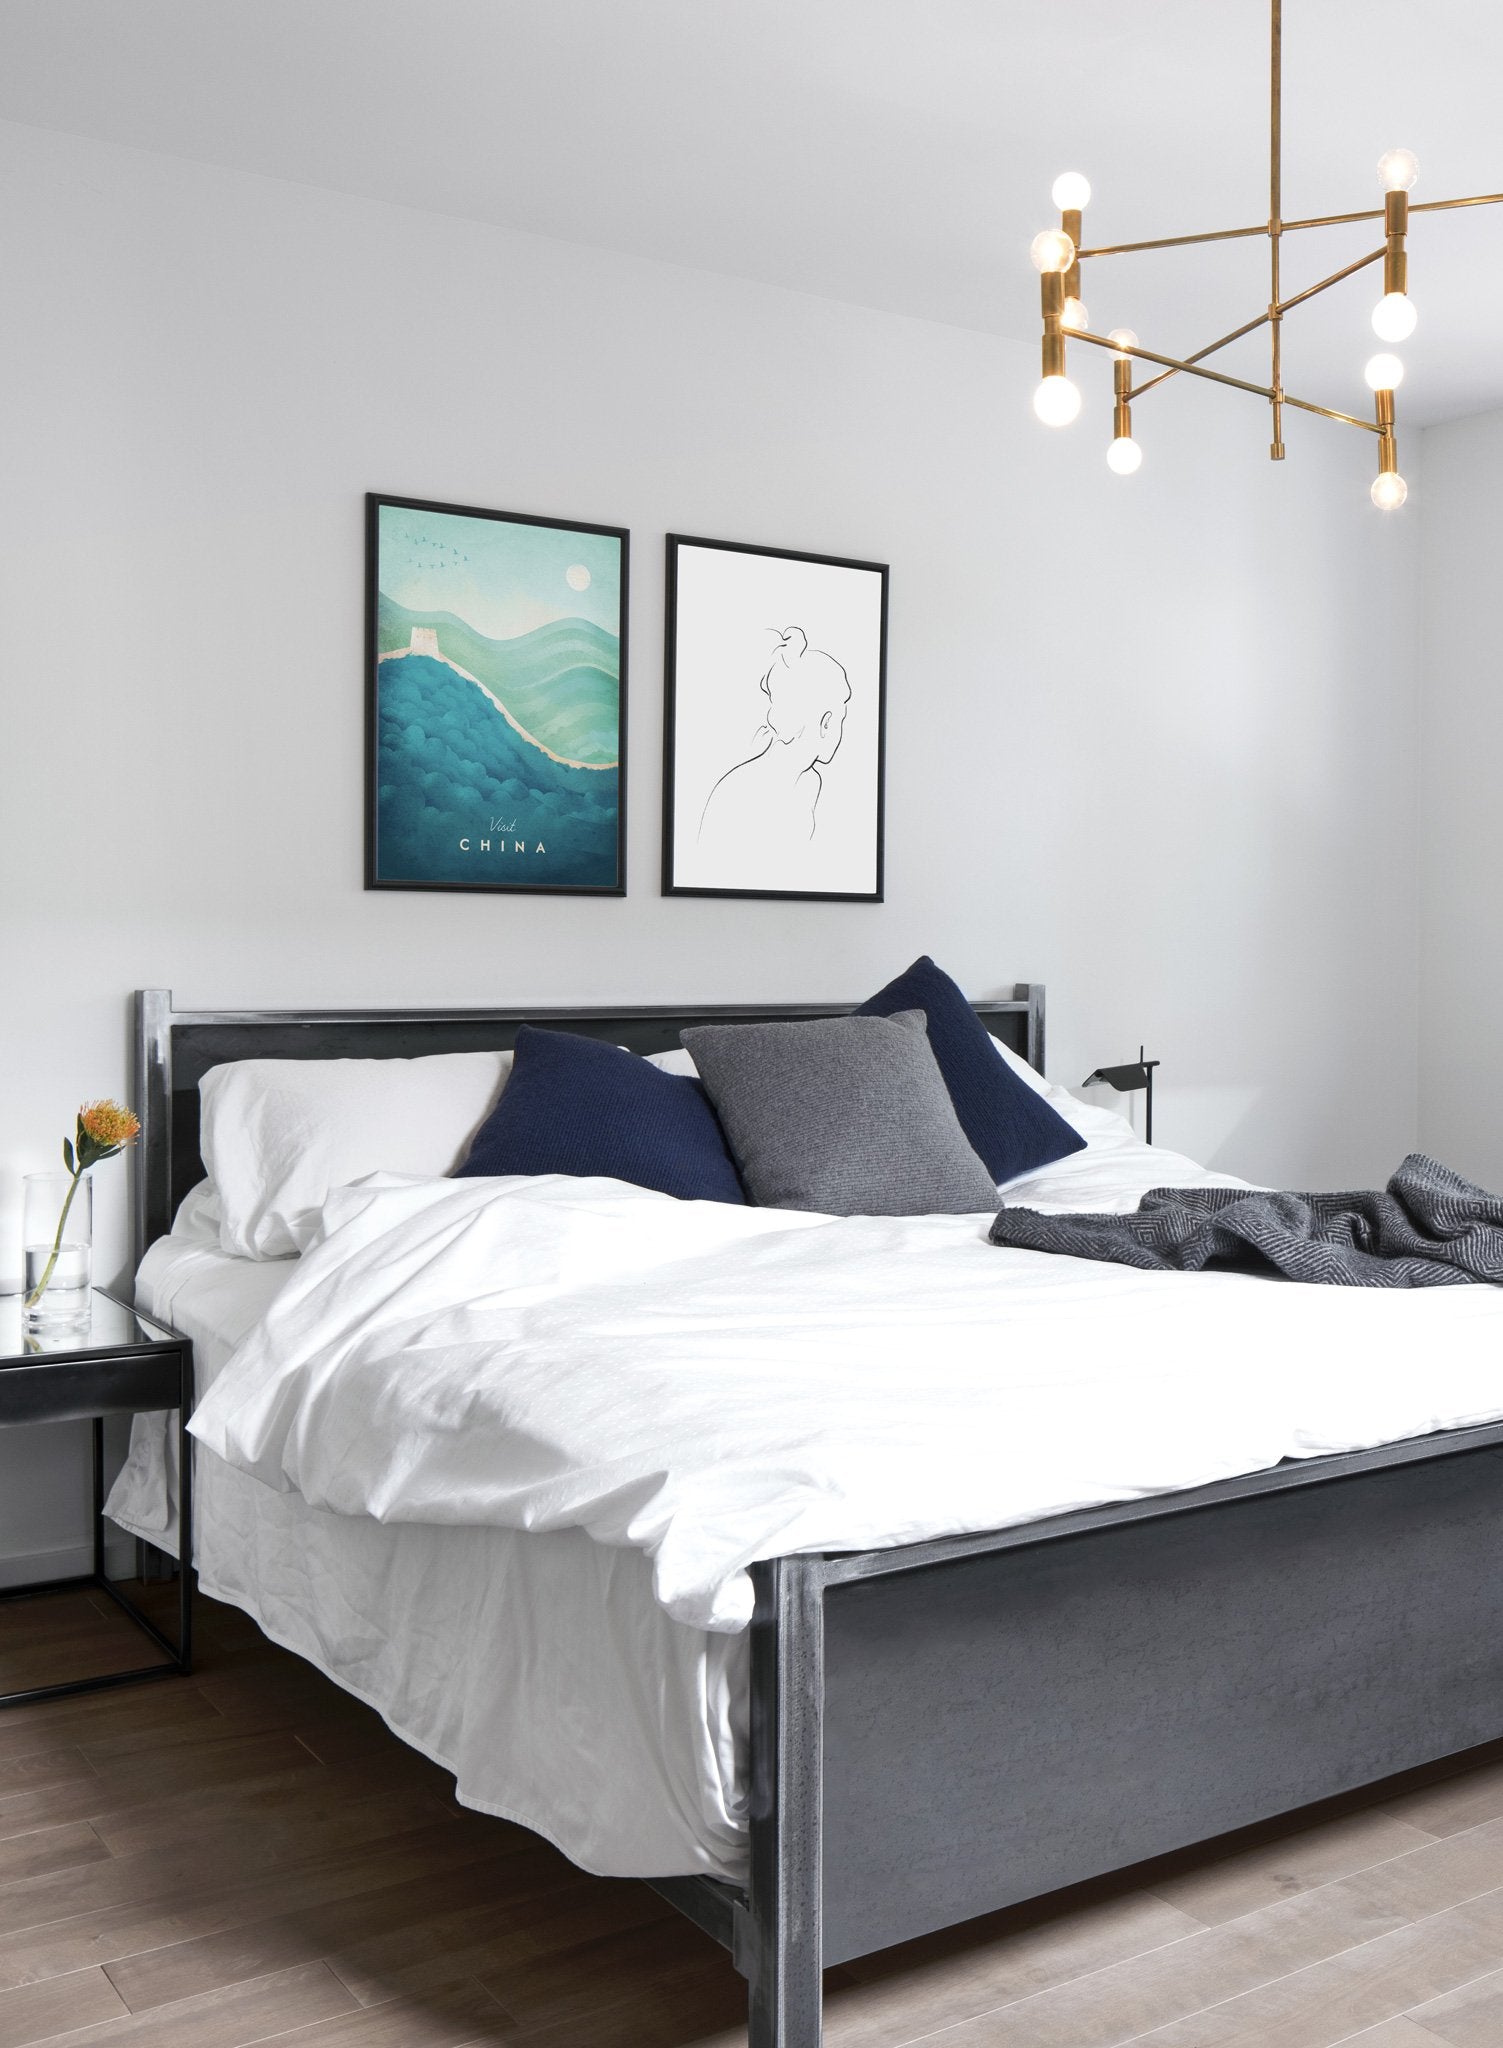 Modern minimalist poster by Opposite Wall with poster trio of illustration of Canada - EntrywayModern minimalist poster by Opposite Wall with poster trio of illustration of CanaModern minimalist poster by Opposite Wall with poster duo of illustration of China - Bedroom